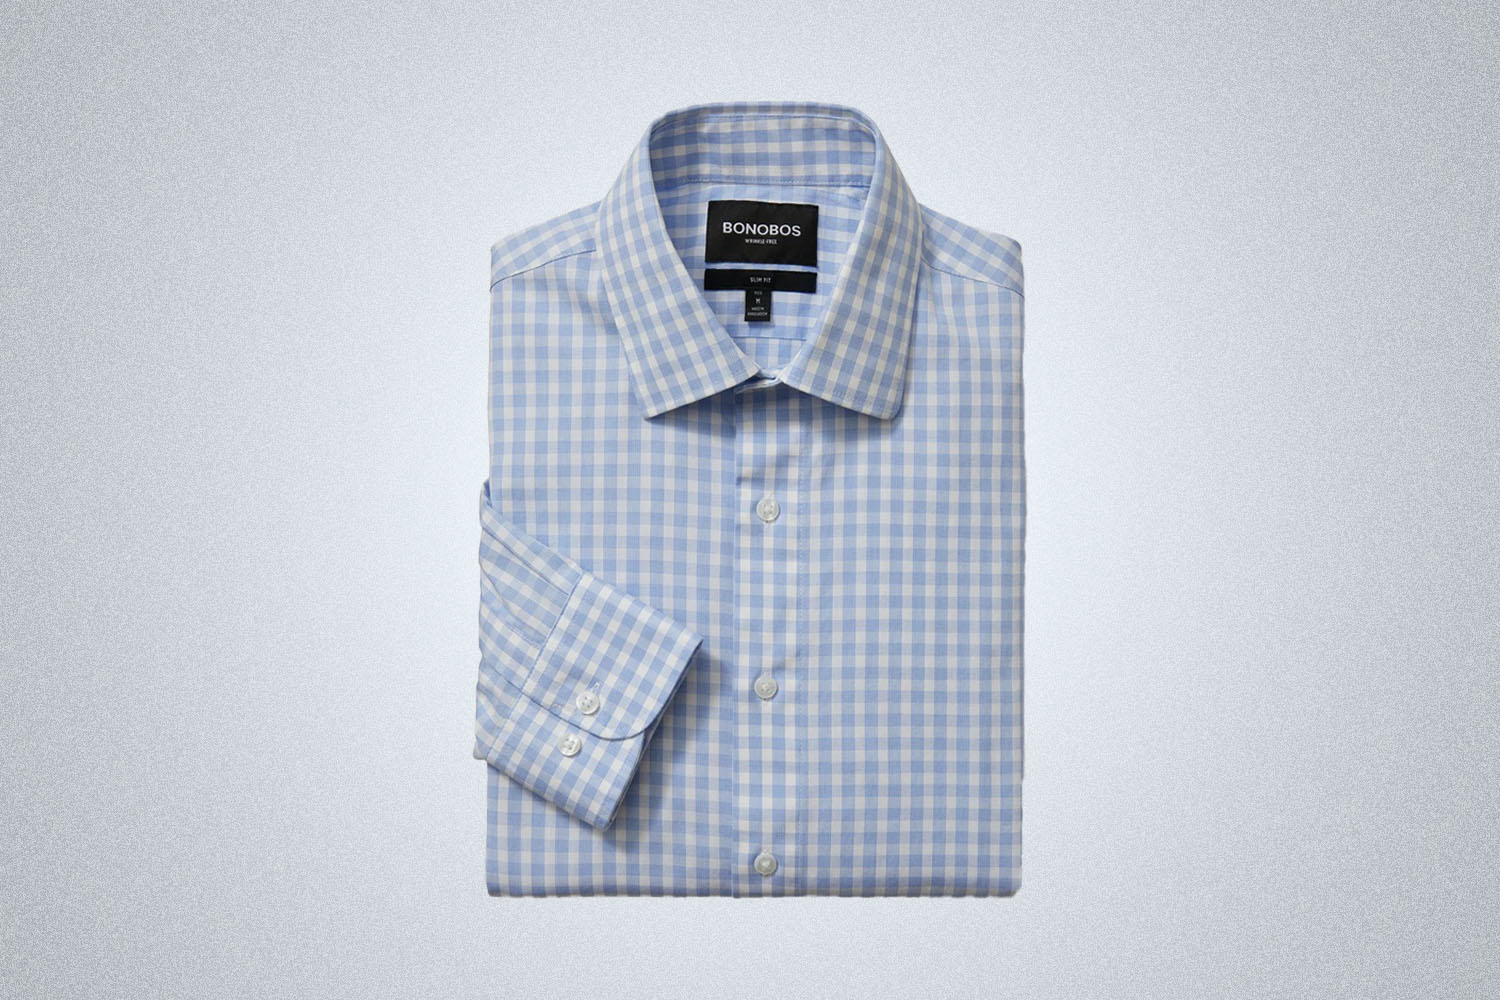 a blue checked shirt from Bonobos on a grey background